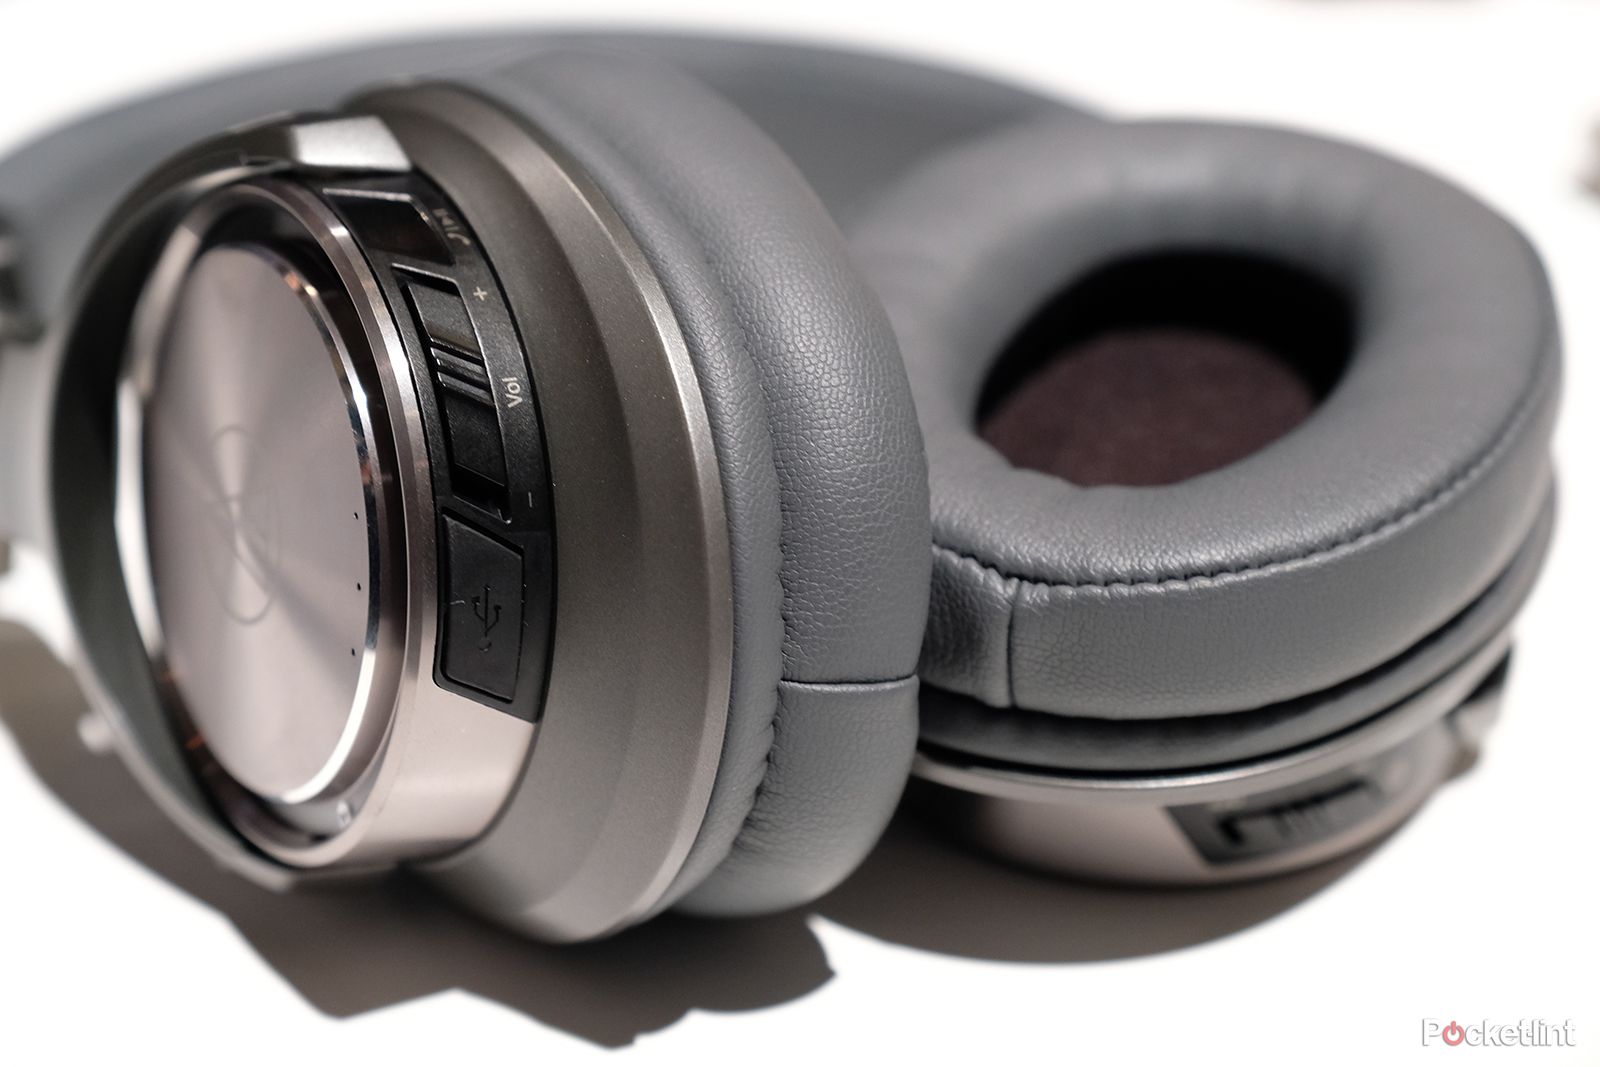 audio technica ath dsr9bt preview image 14